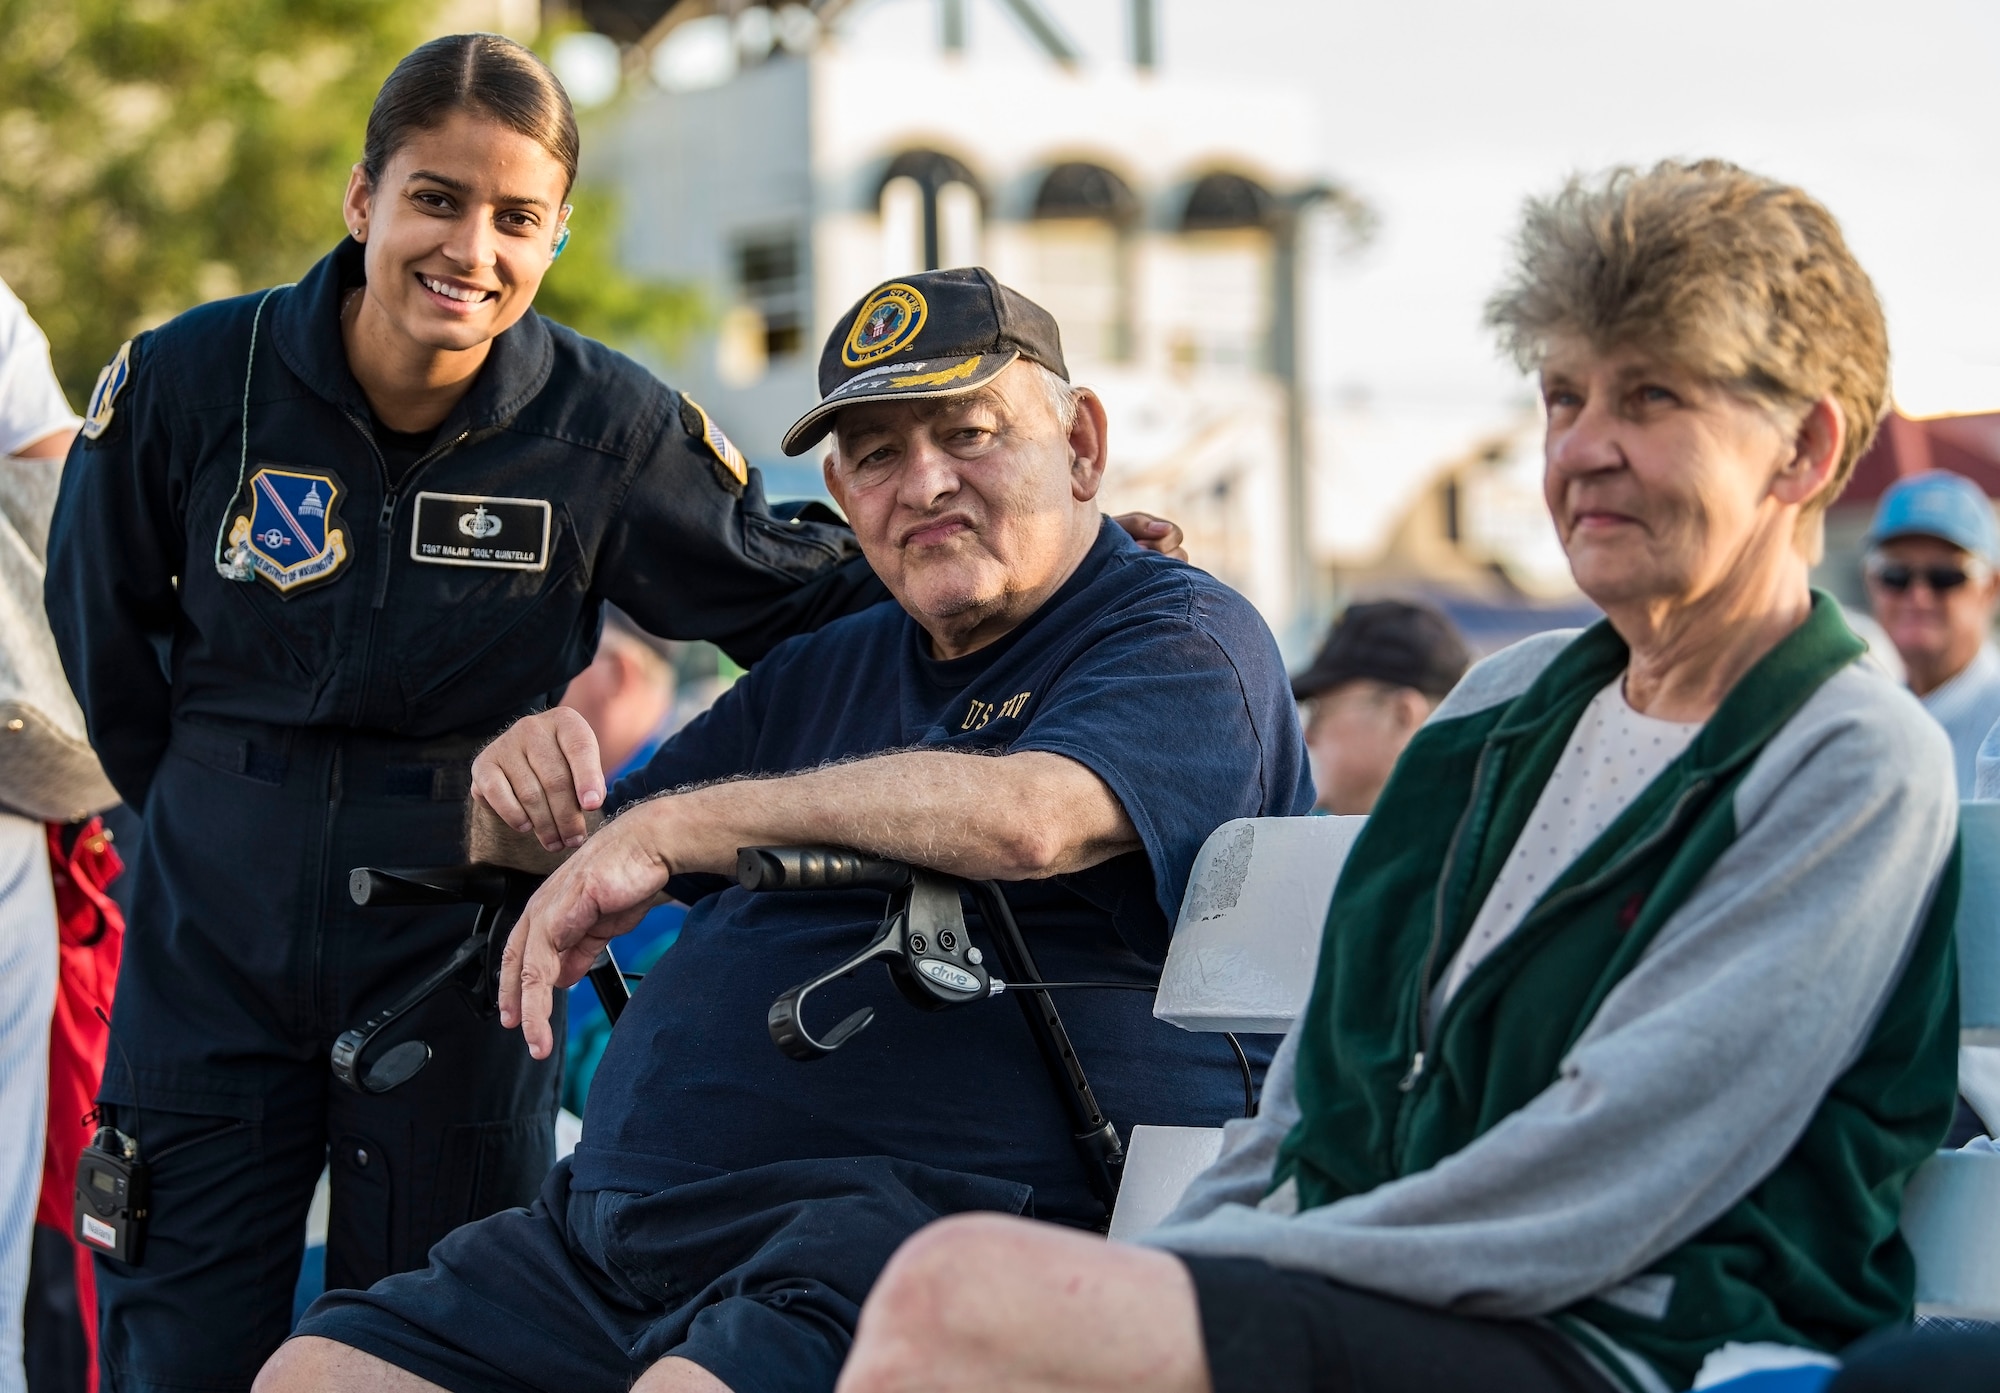 Tech. Sgt. Nalani Quintello, Max Impact vocalist, Washington, D.C., poses for a photo with U.S. Navy veteran David Bethard, a Millsboro, Del., resident, June 16, 2018, at the bandstand in Rehoboth Beach, Del. Bethard served four years as a cook onboard the USS Everglades (AD-24) before making his home in Delaware. Max Impact, the premier rock band of the U.S. Air Force, is stationed at Joint Base Anacostia-Bolling in Washington, D.C. (U.S. Air Force photo by Roland Balik)